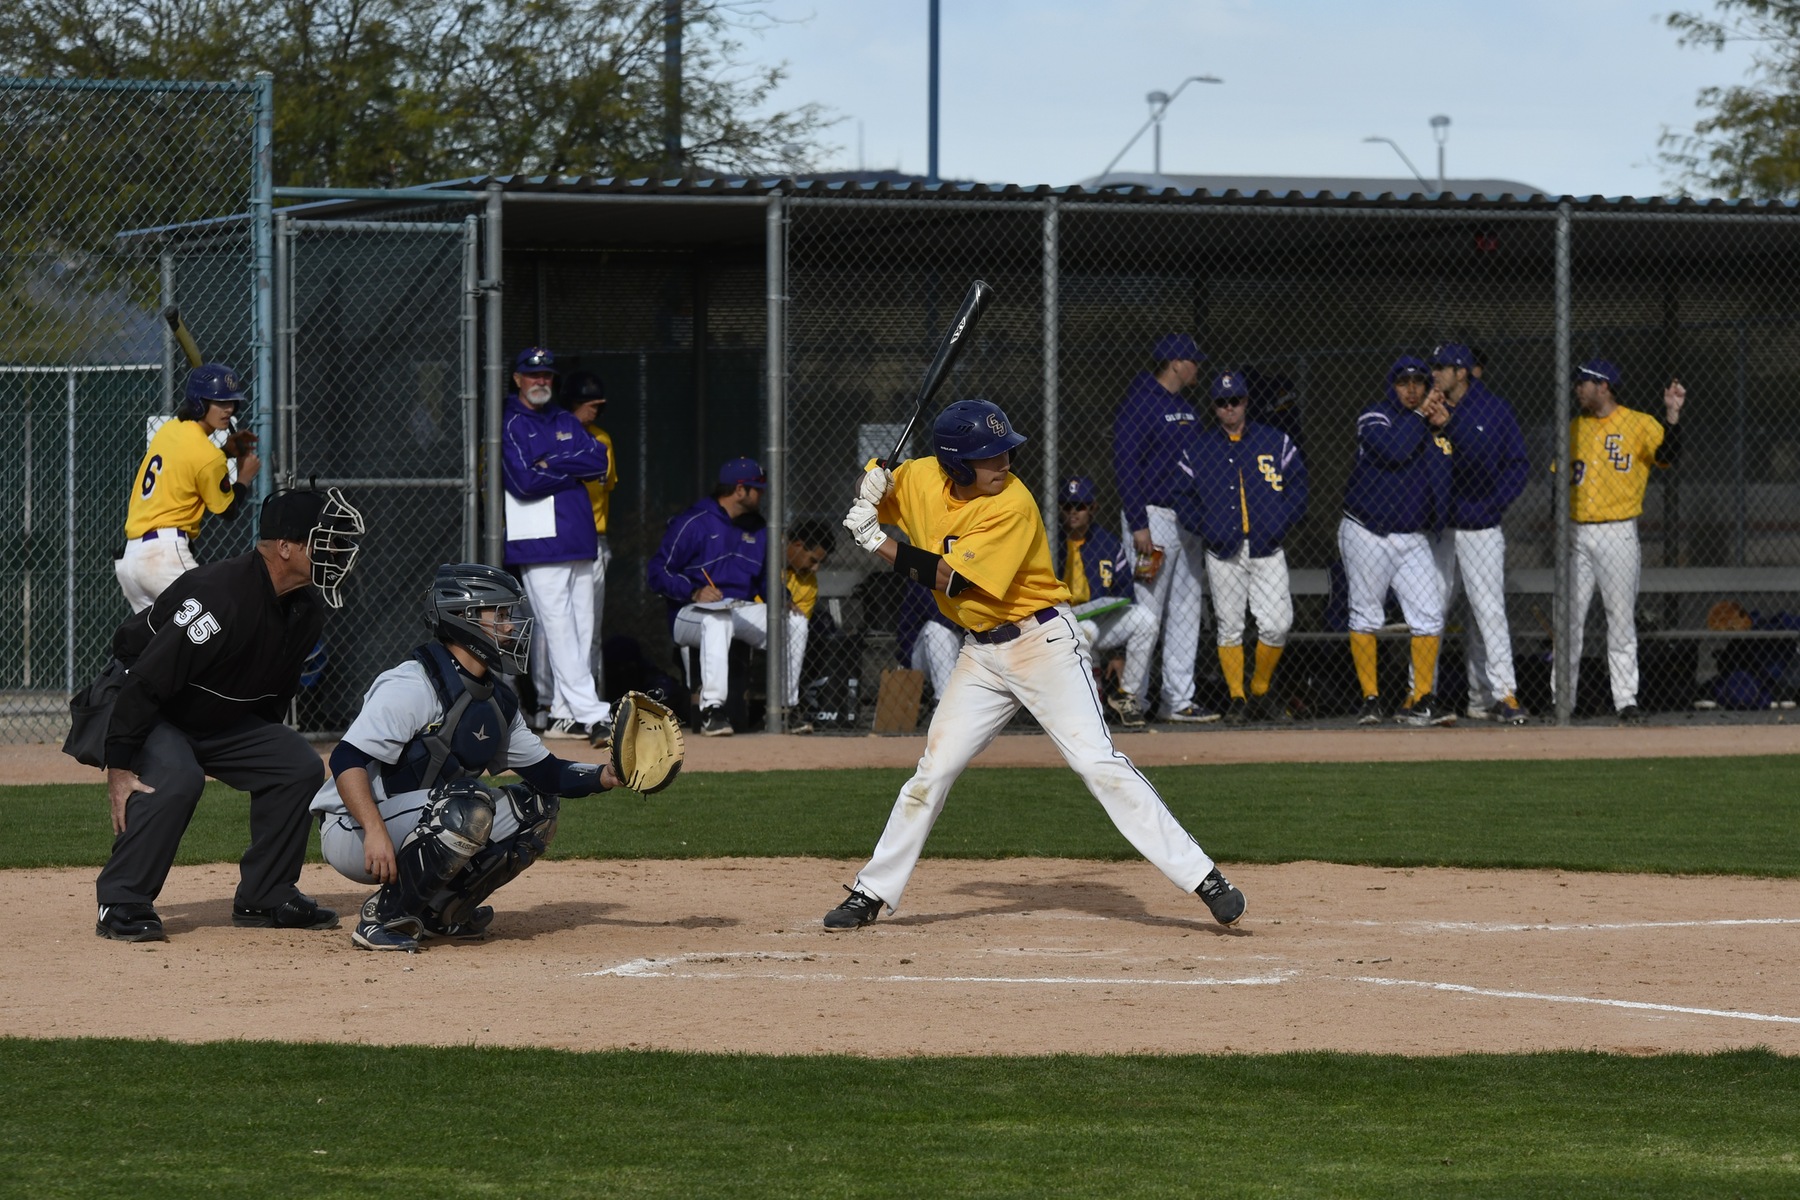 Kyle Reuser picked up the first hit of his Cal Lutheran career and also blasted his first-career home run in the 7-2 win over Whitman. (Photo Credit: John Barry, Whitman Athletics)